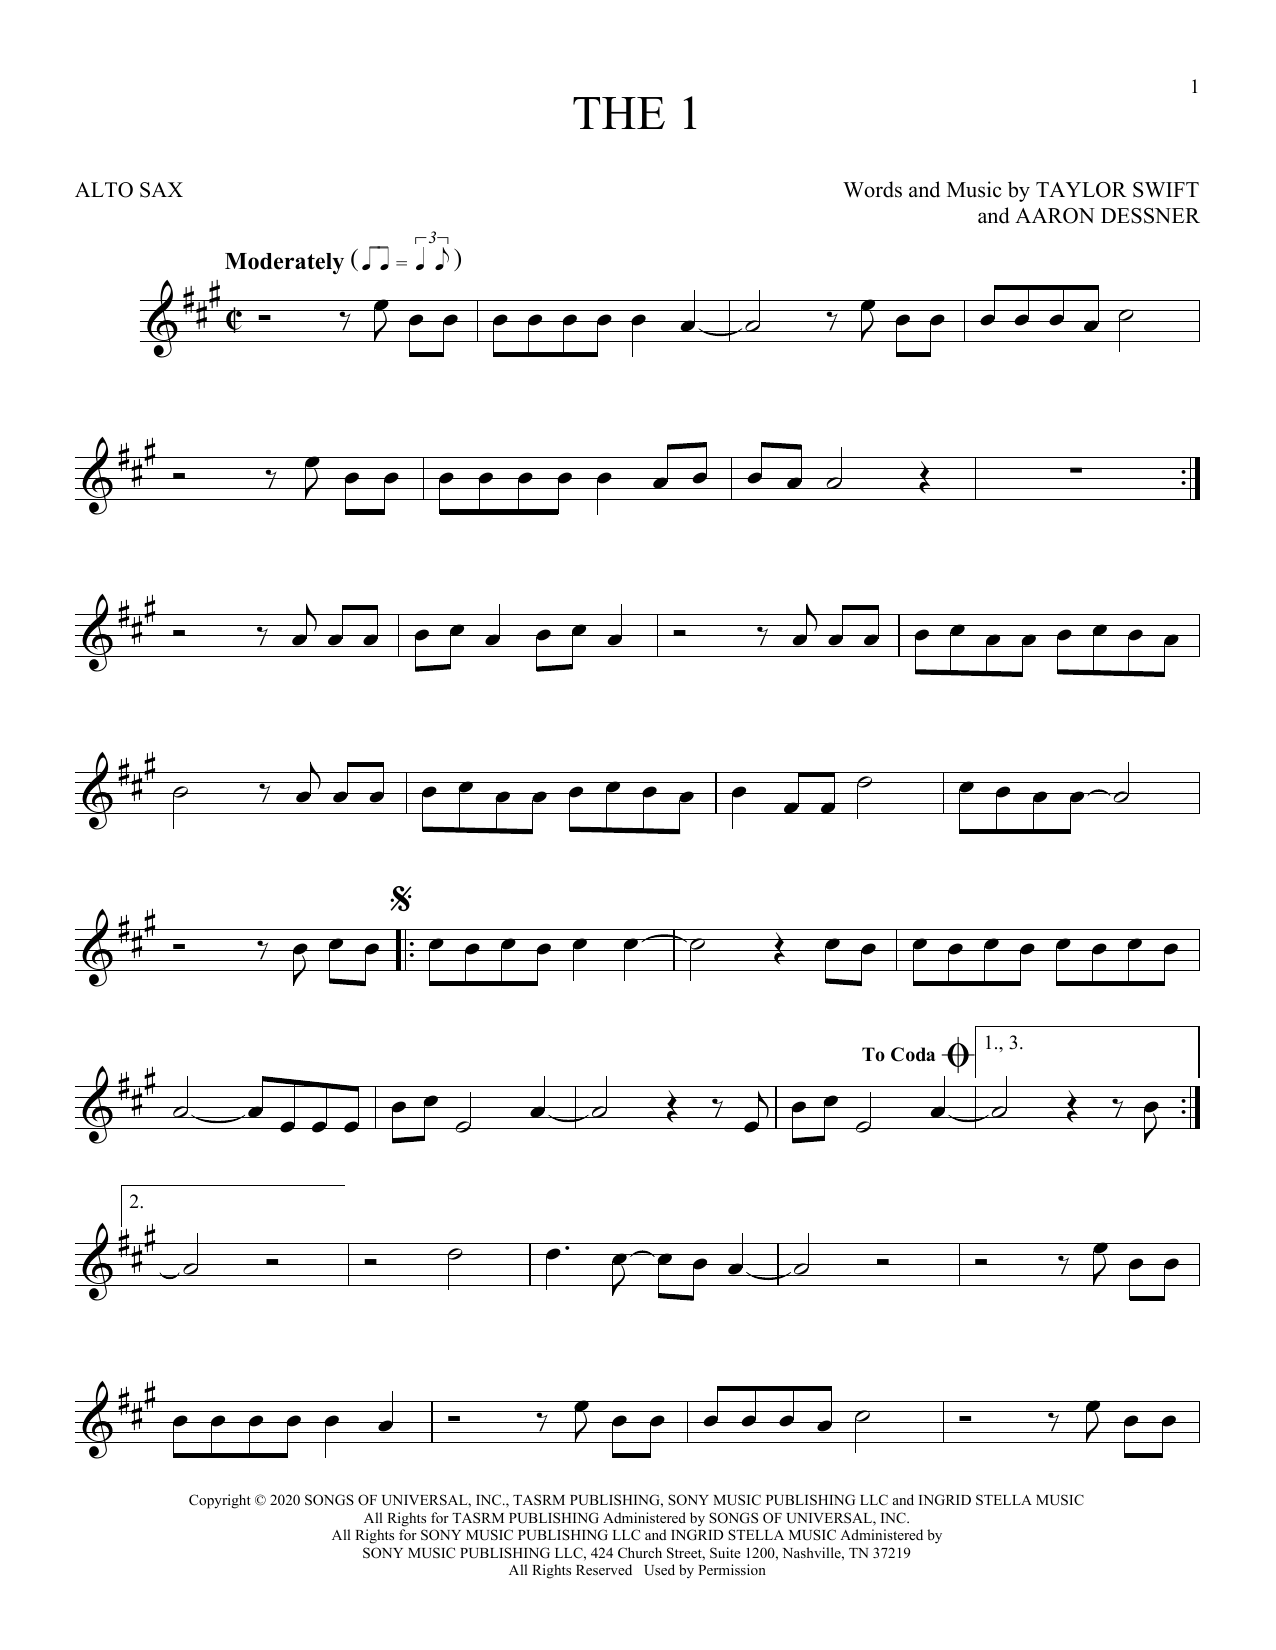 Download Taylor Swift the 1 Sheet Music